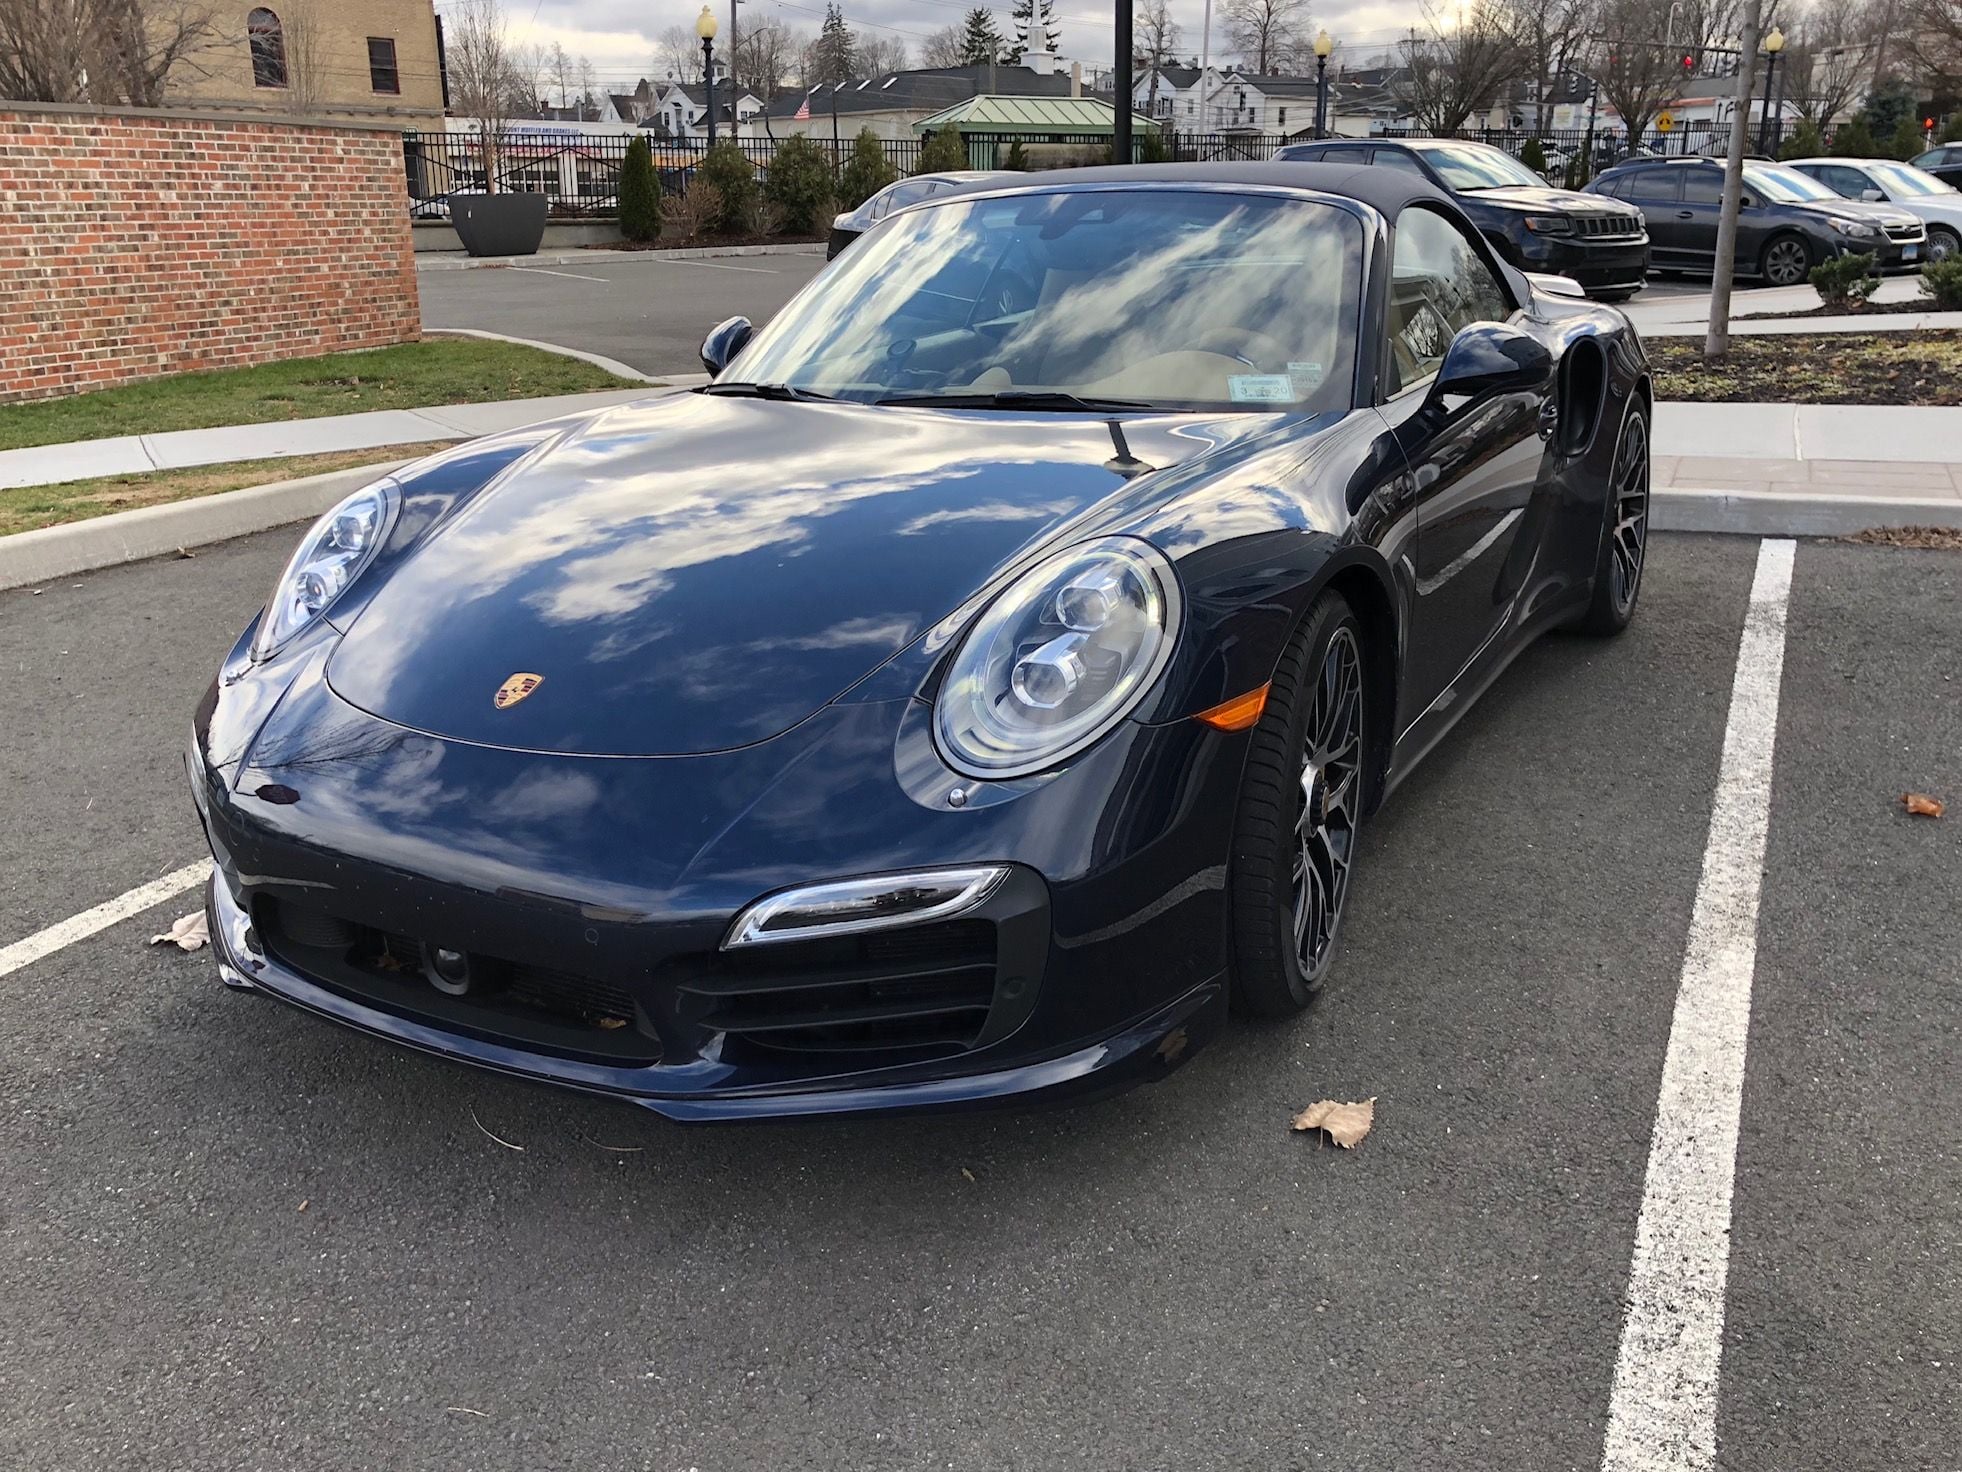 2014 Porsche 911 - 2014 Porsche Turbo S Cabriolet with By Design Stage 4 and Methanol - Used - VIN WP0CD2A97ES173312 - 16,112 Miles - 6 cyl - AWD - Convertible - Blue - Danbury, CT 06810, United States